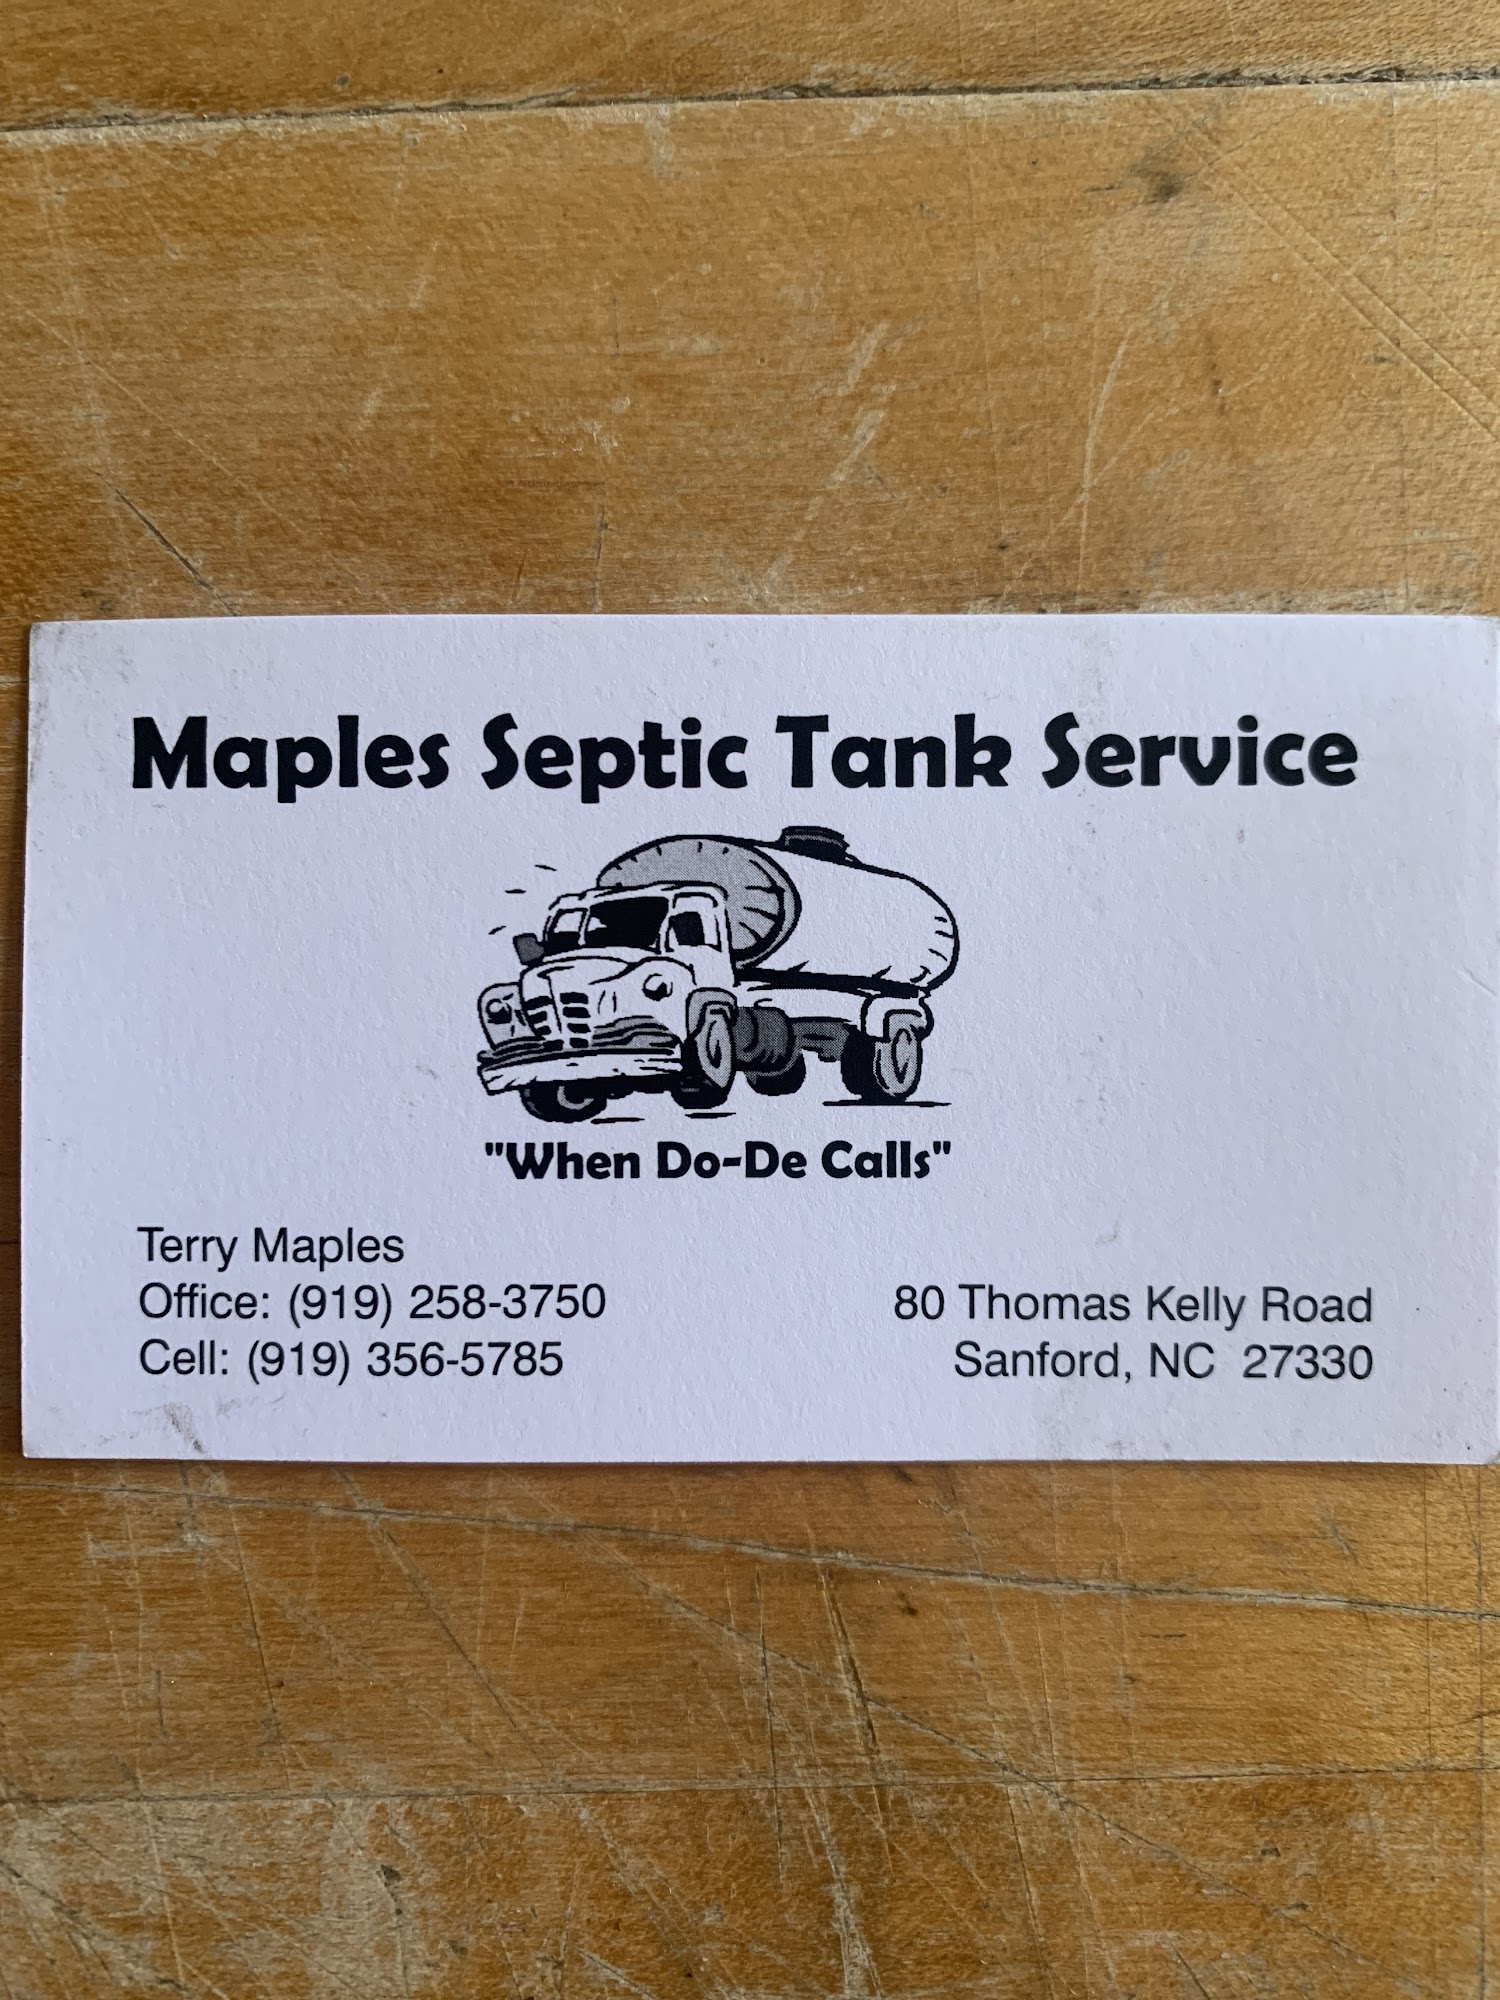 Maples Septic Tank Services